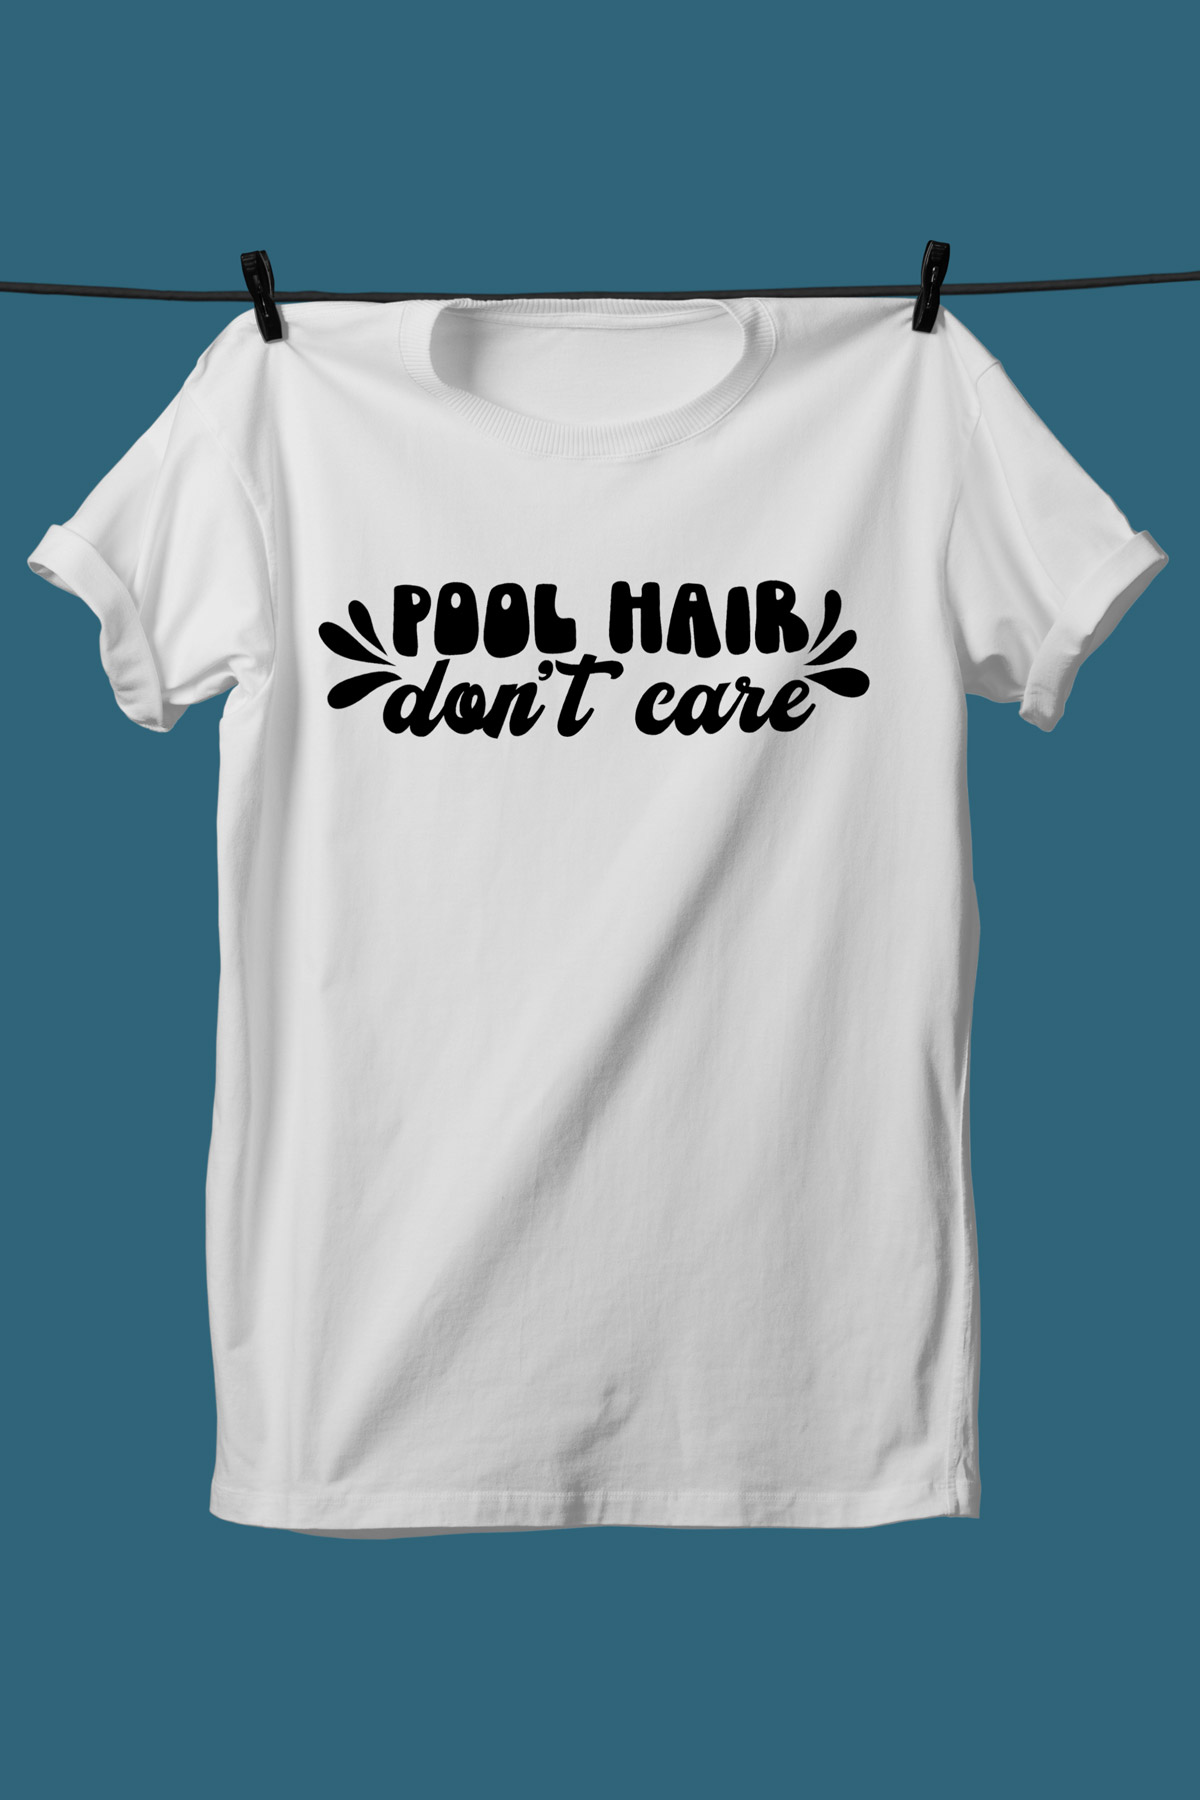 This image shows one of the SVGs from the free summer SVG set on a white tshirt. This one says pool hair don't care.